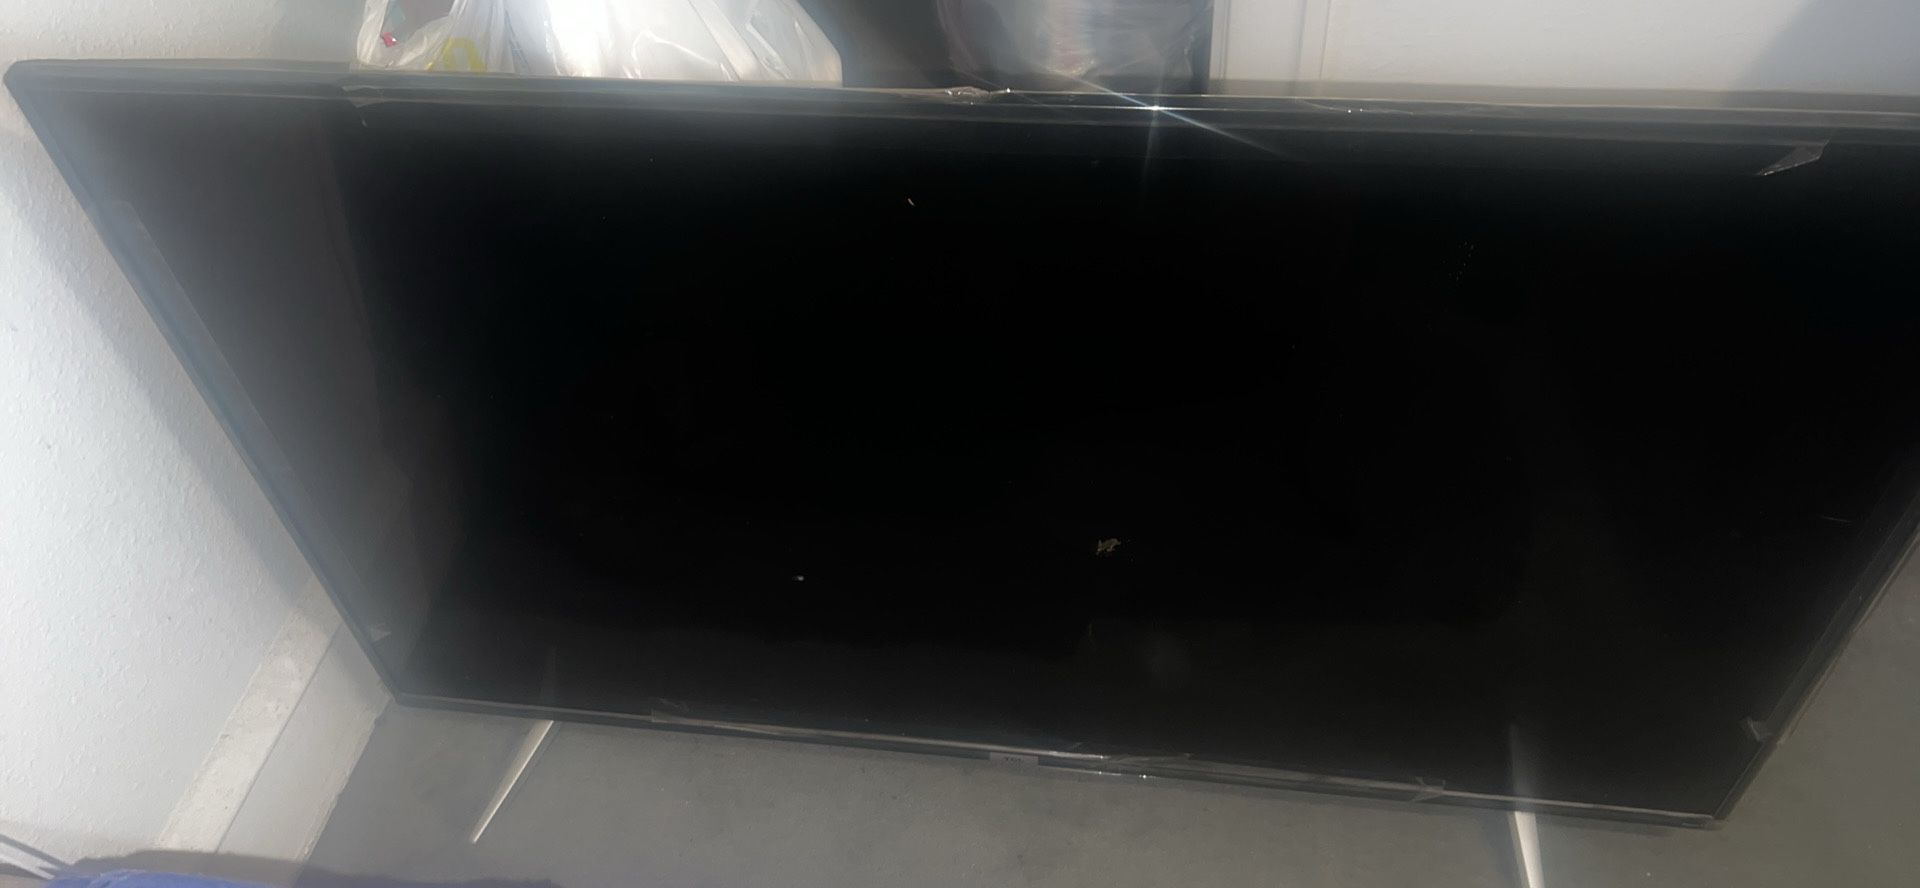 Flat Screen Tv With Messed Up Screen